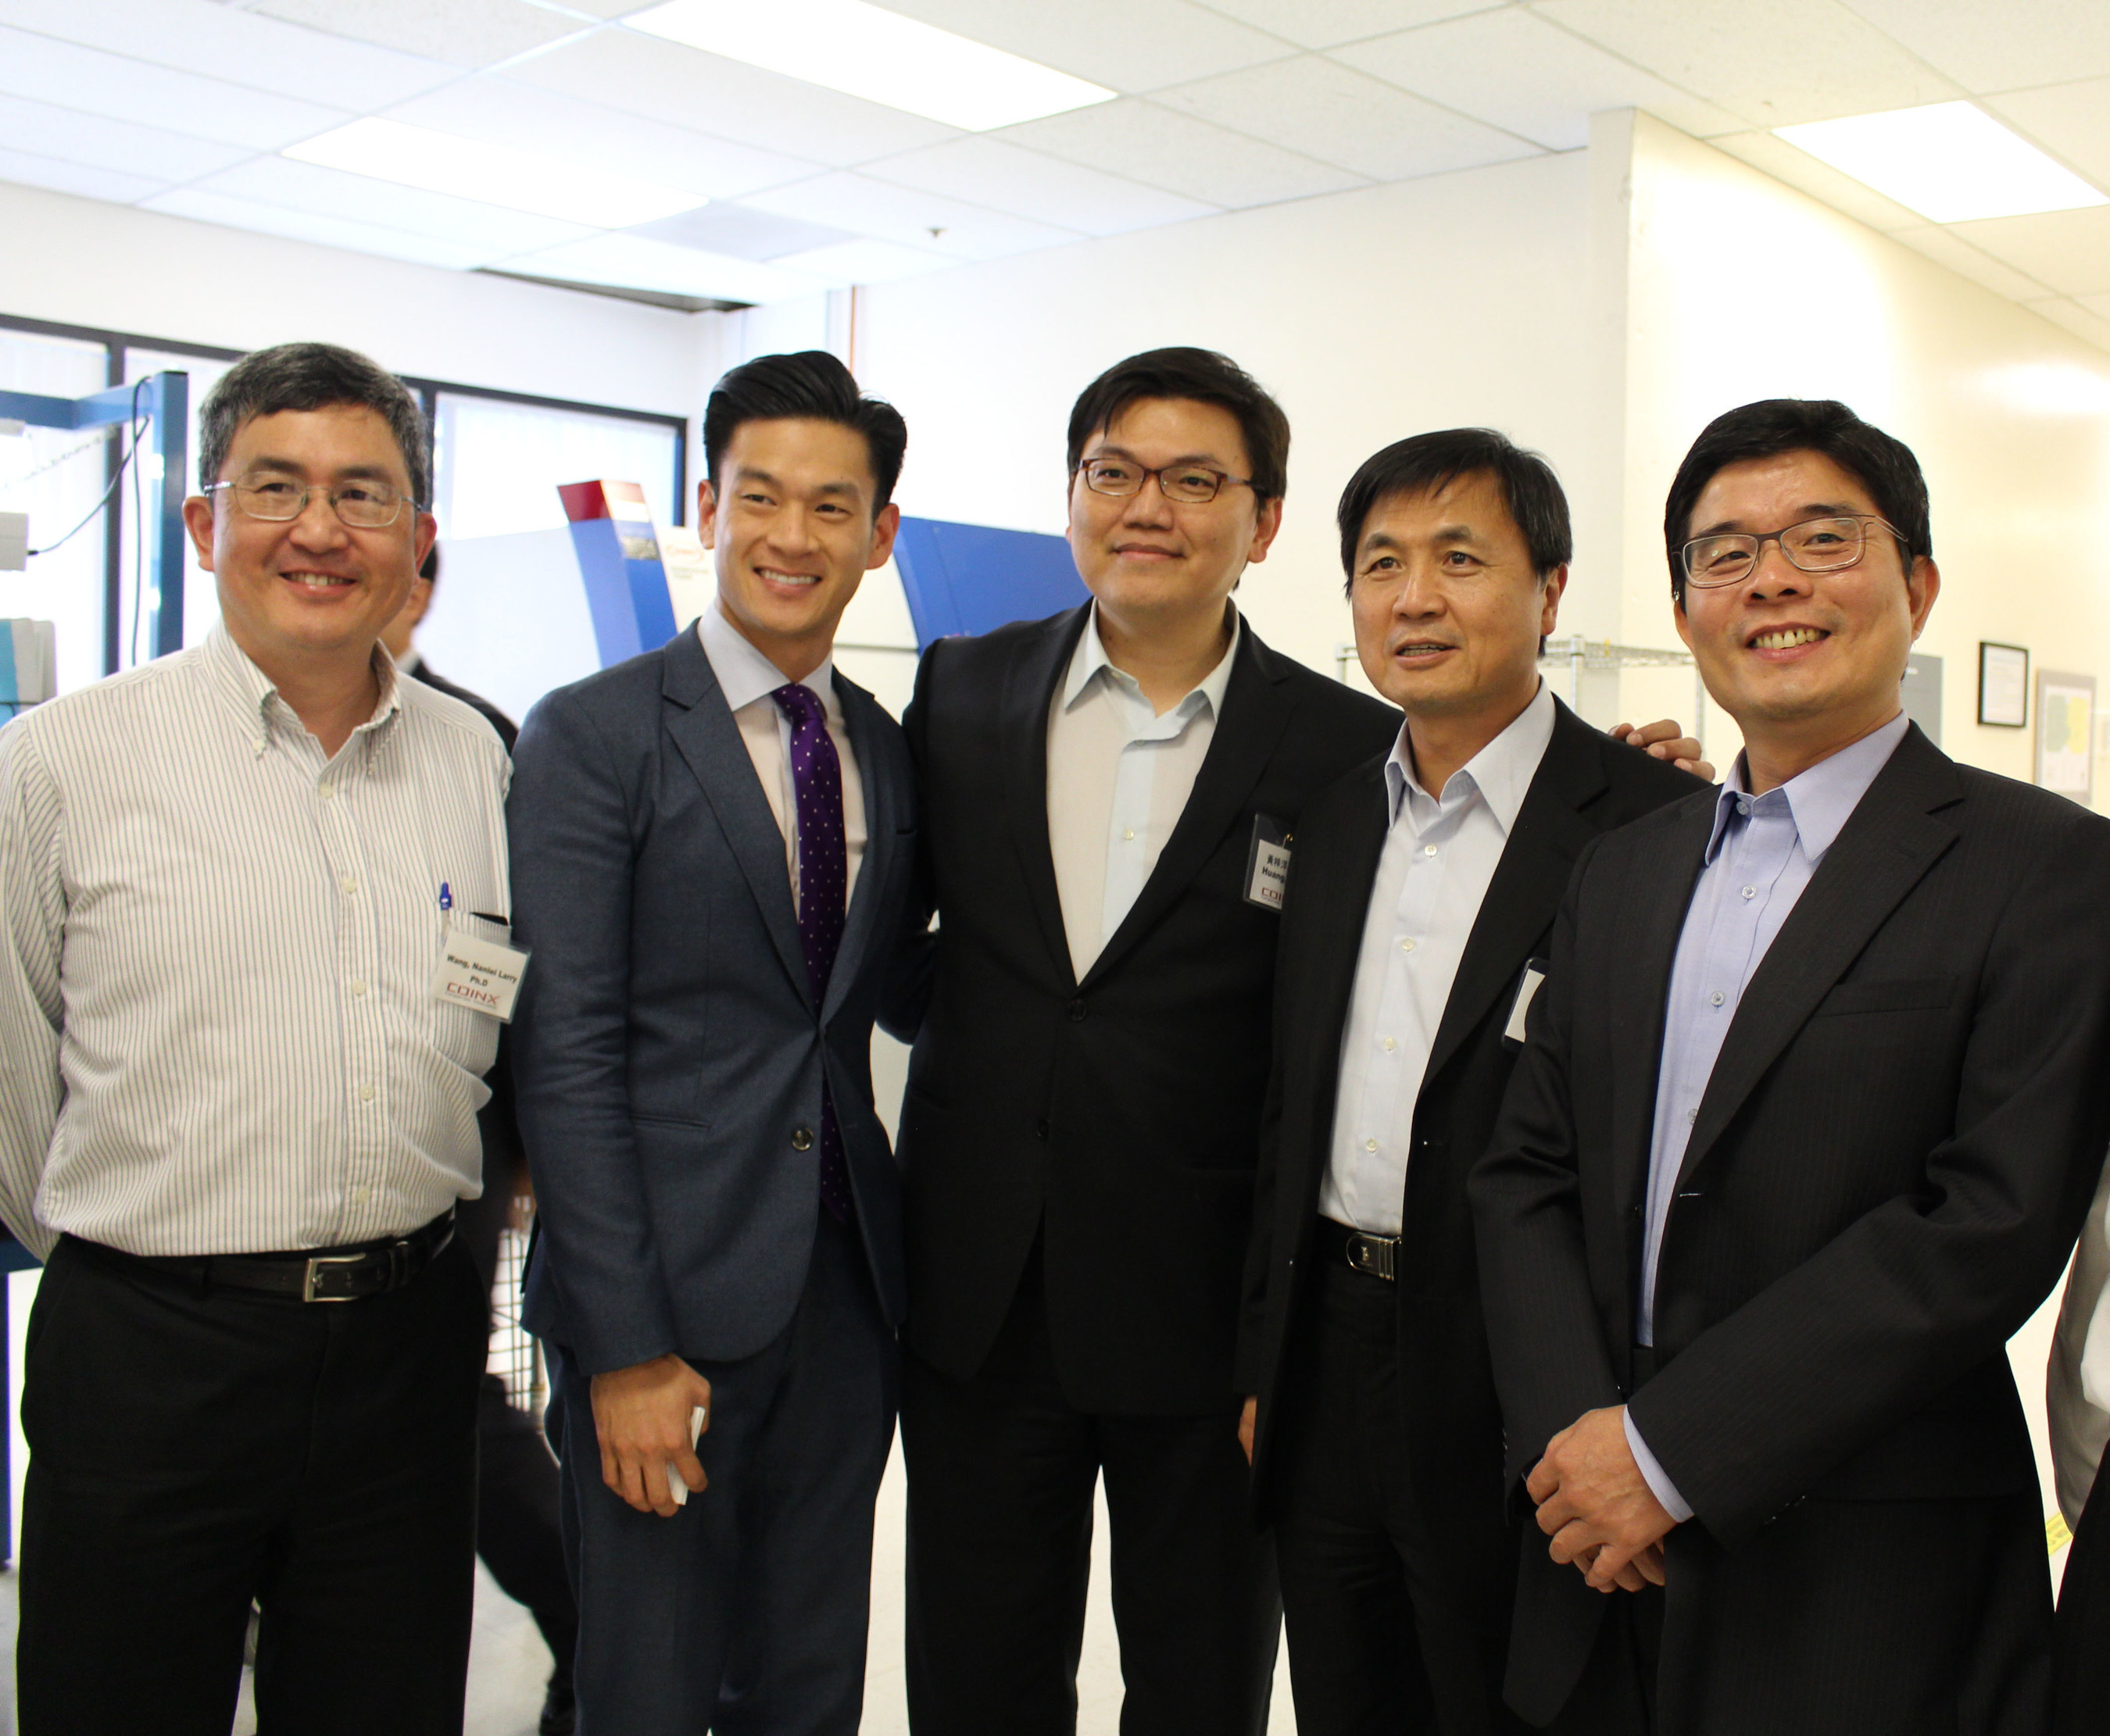 (From left to right) CEO of TIEC,Dr. Larry Wang; California State Assembly Member-Evan Low; Founding Partner of COINX-Dr. Eric Huang; Minister of Science and Technology-Dr. Jyuo-Min Shyu and Director of TECO, Dr. Ting-An Wang